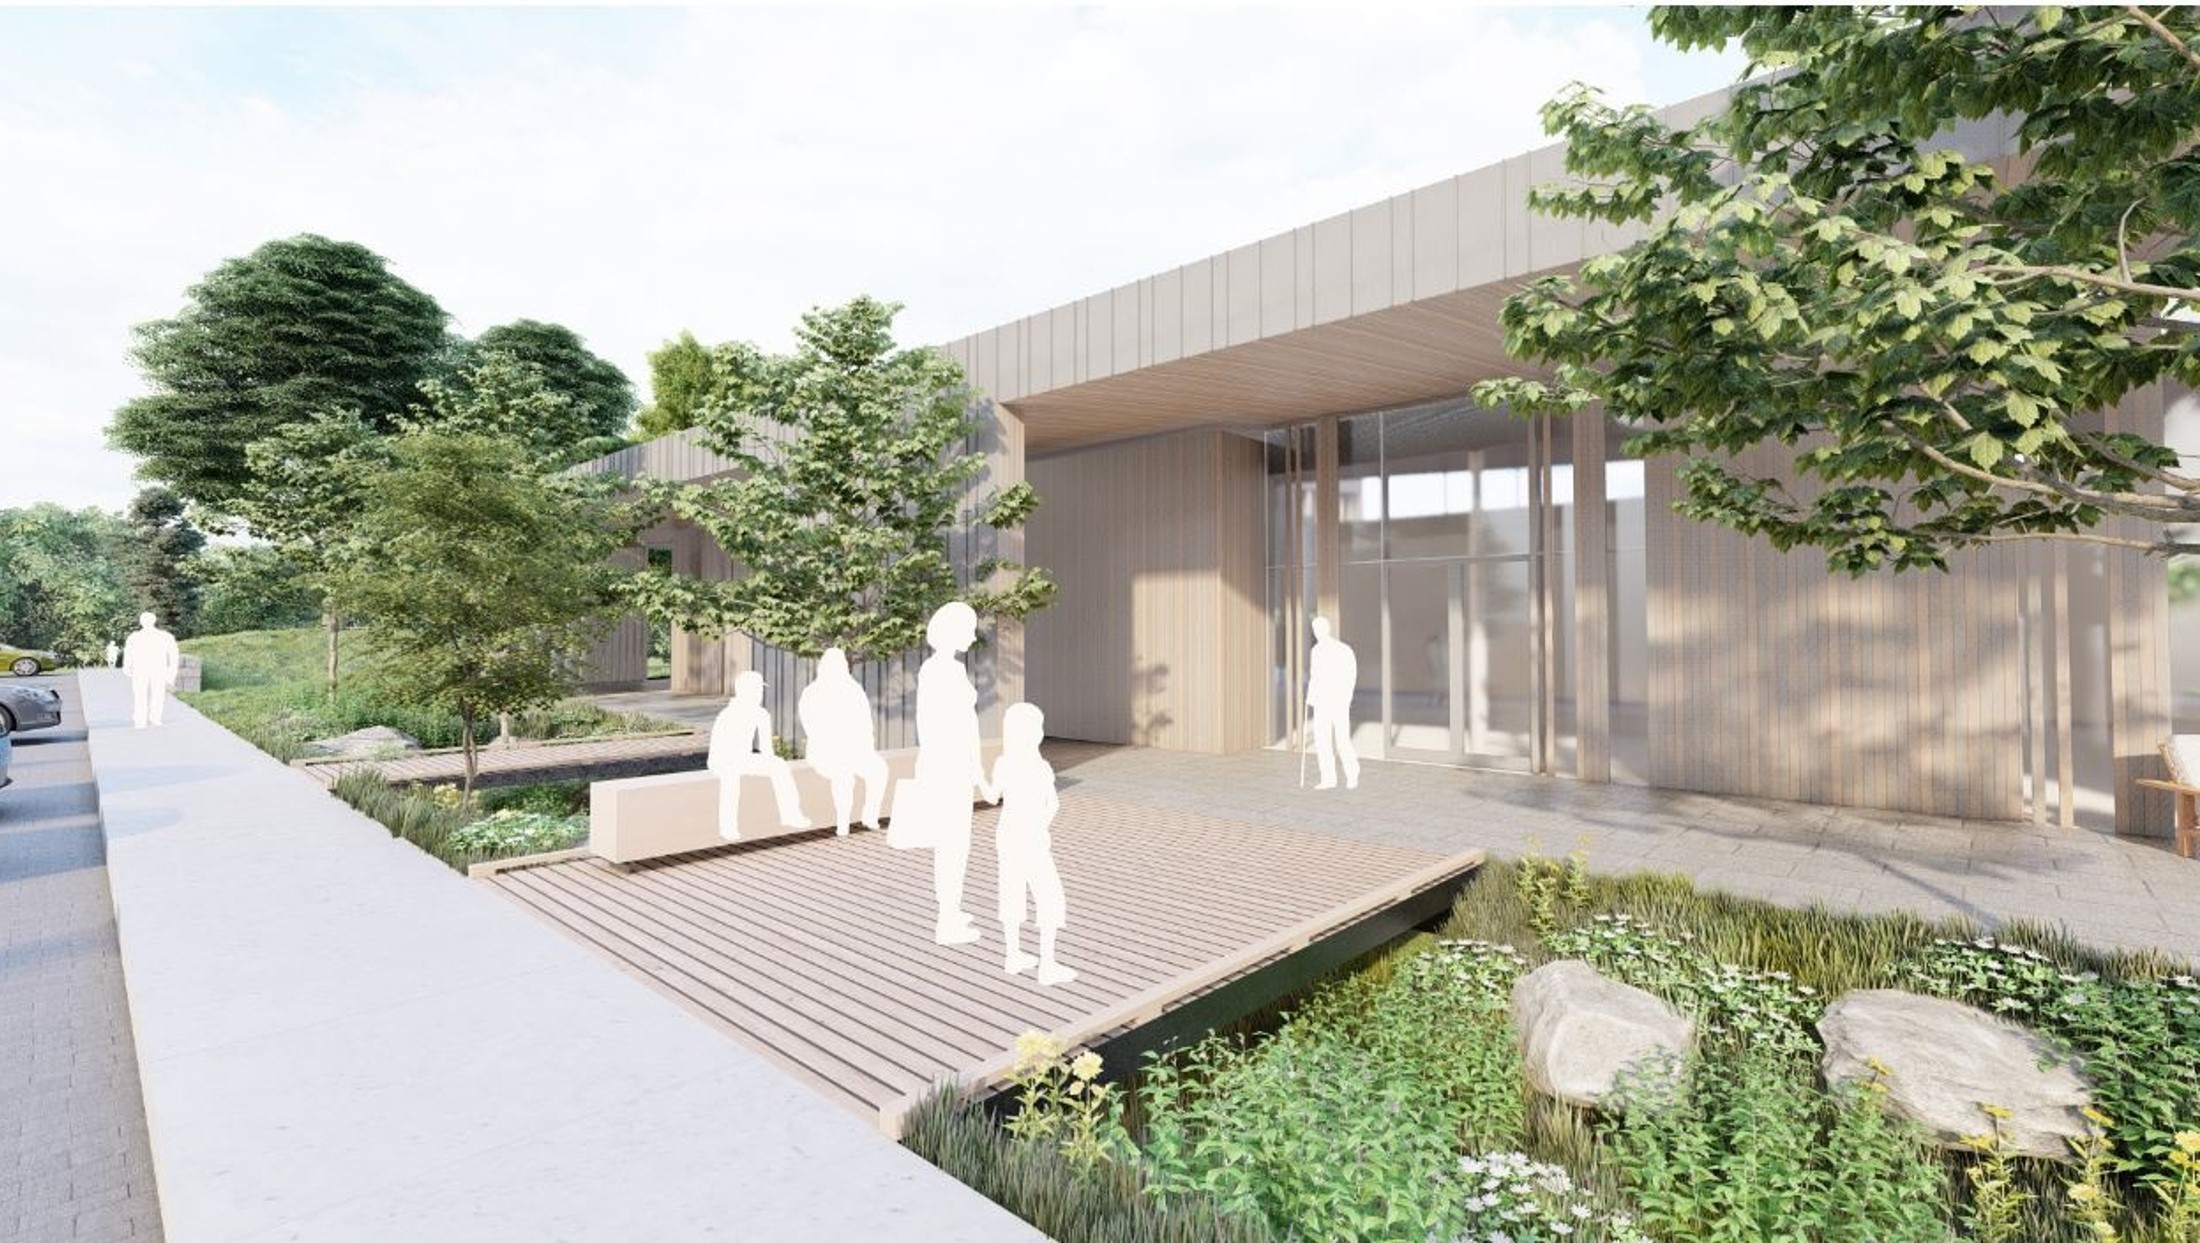 rendering of an entrance to a new one-story westonka library building